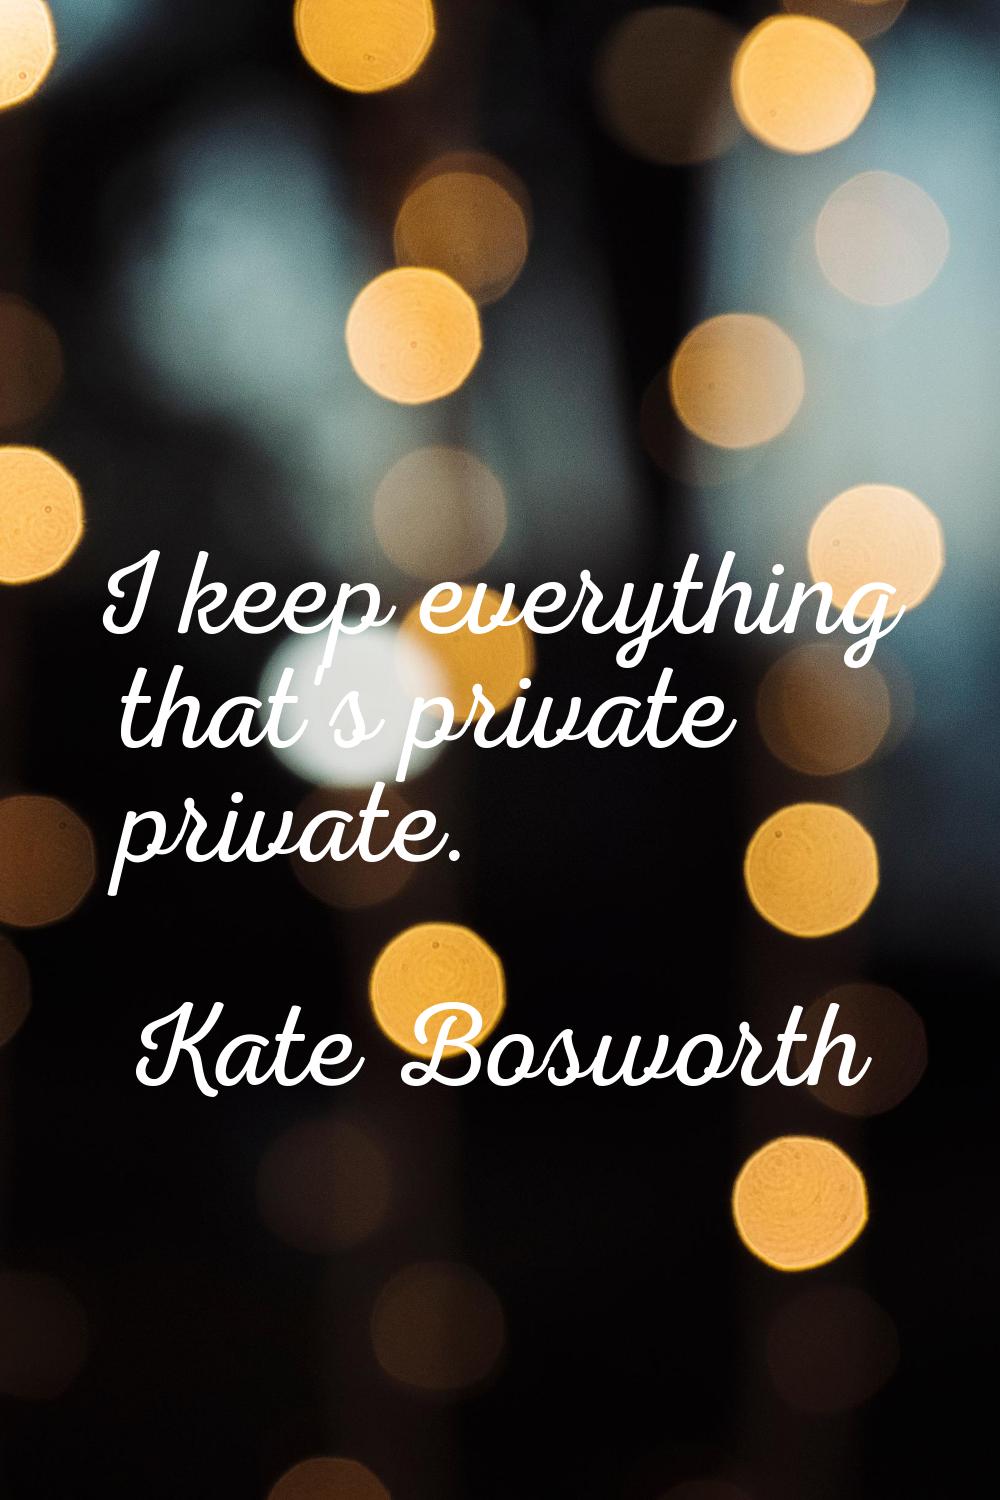 I keep everything that's private private.